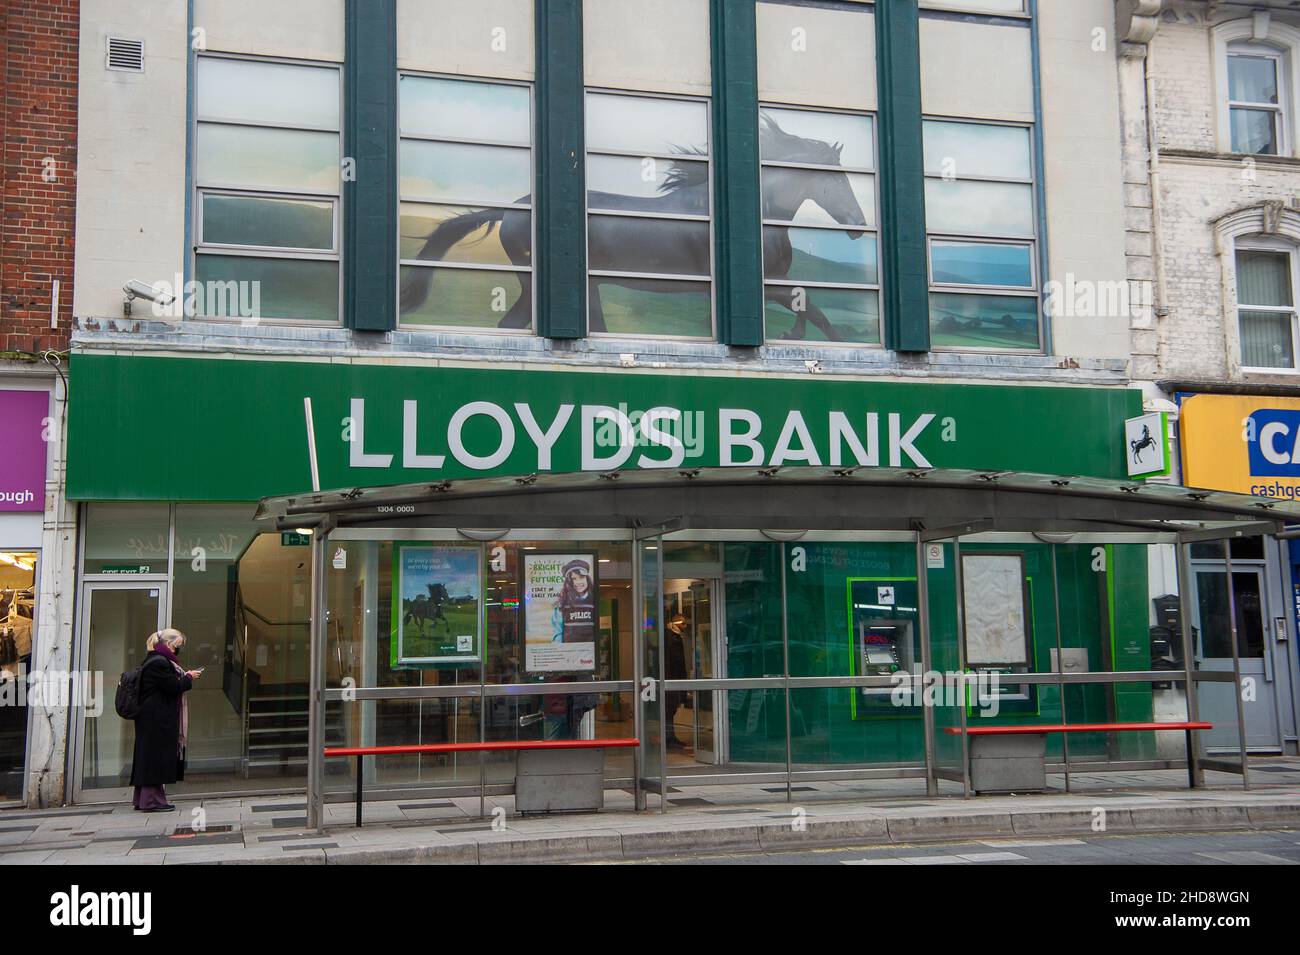 Slough, Berkshire, UK. 30th  December, 2021. The Lloyds Bank in Slough remains open but many high street banks have closed permanently during the Covid-19 Pandemic. Credit: Maureen McLean/Alamy Stock Photo